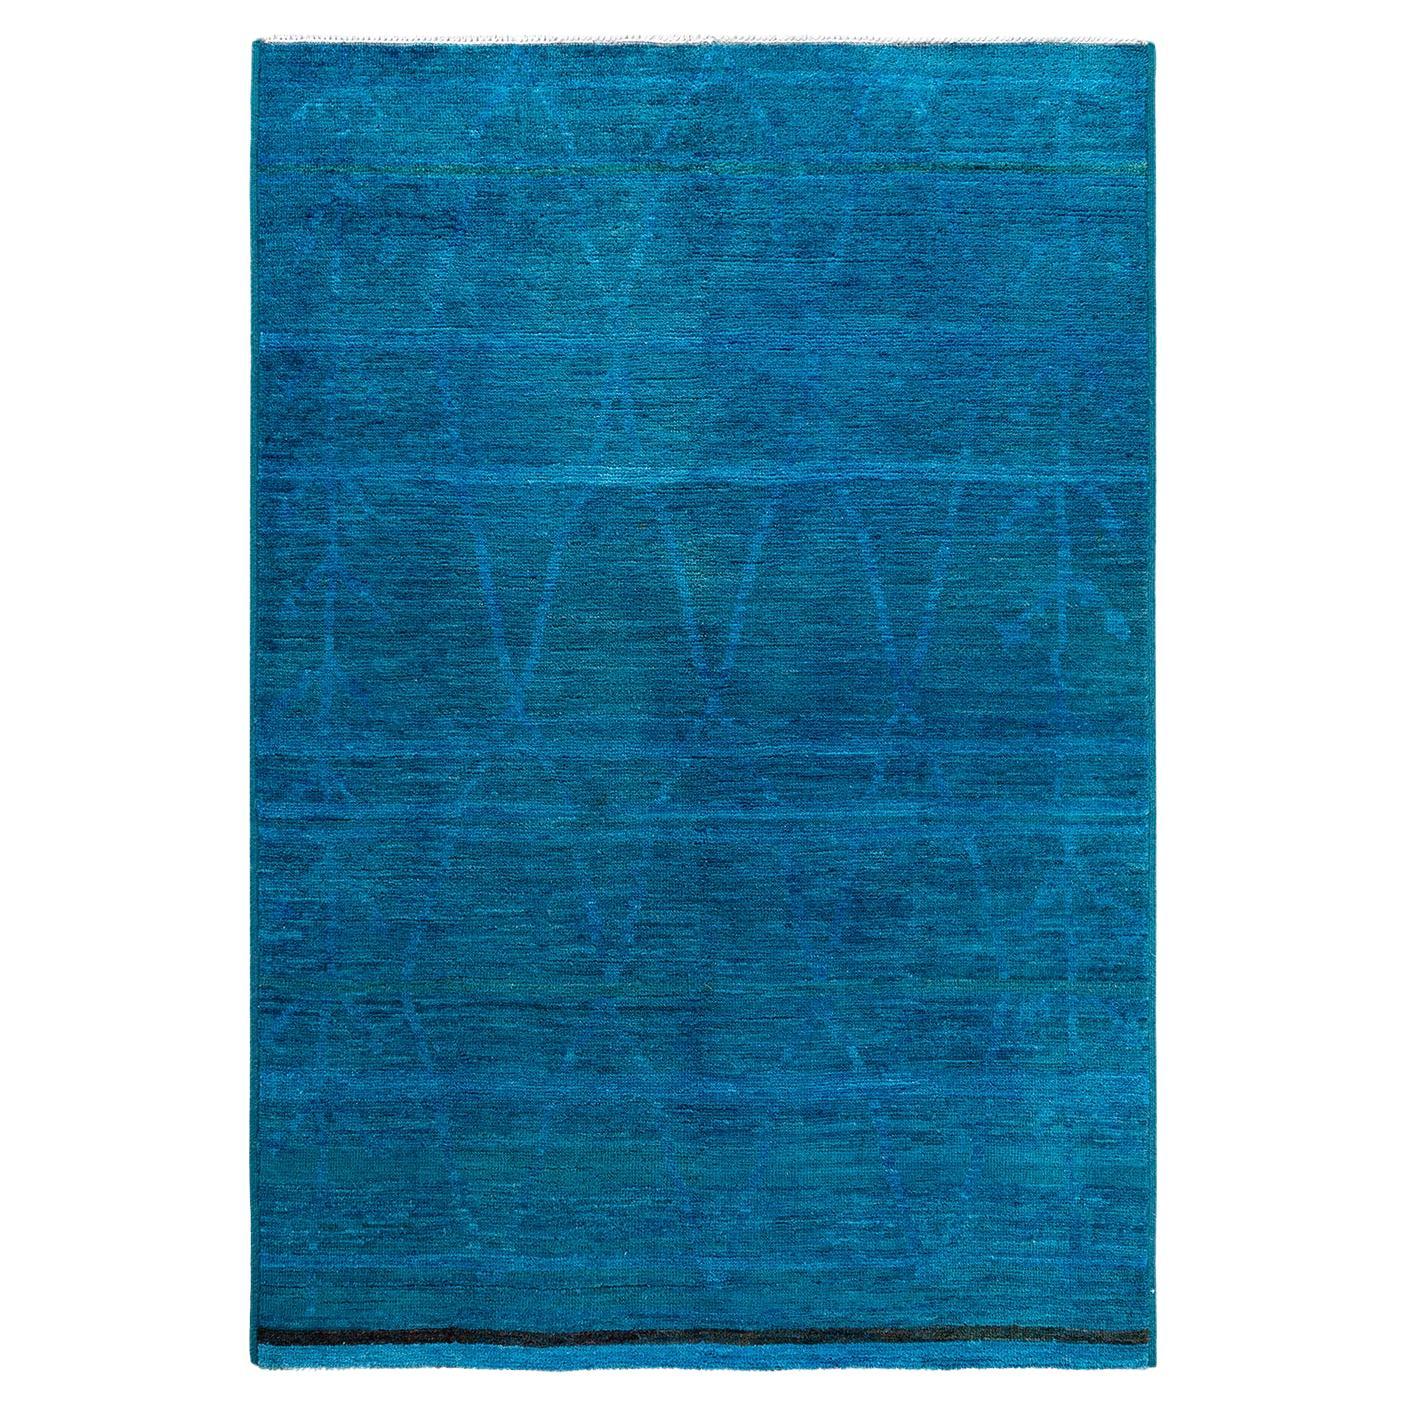 Contemporary Modern Handknotted Wool Blue Area Rug im Angebot